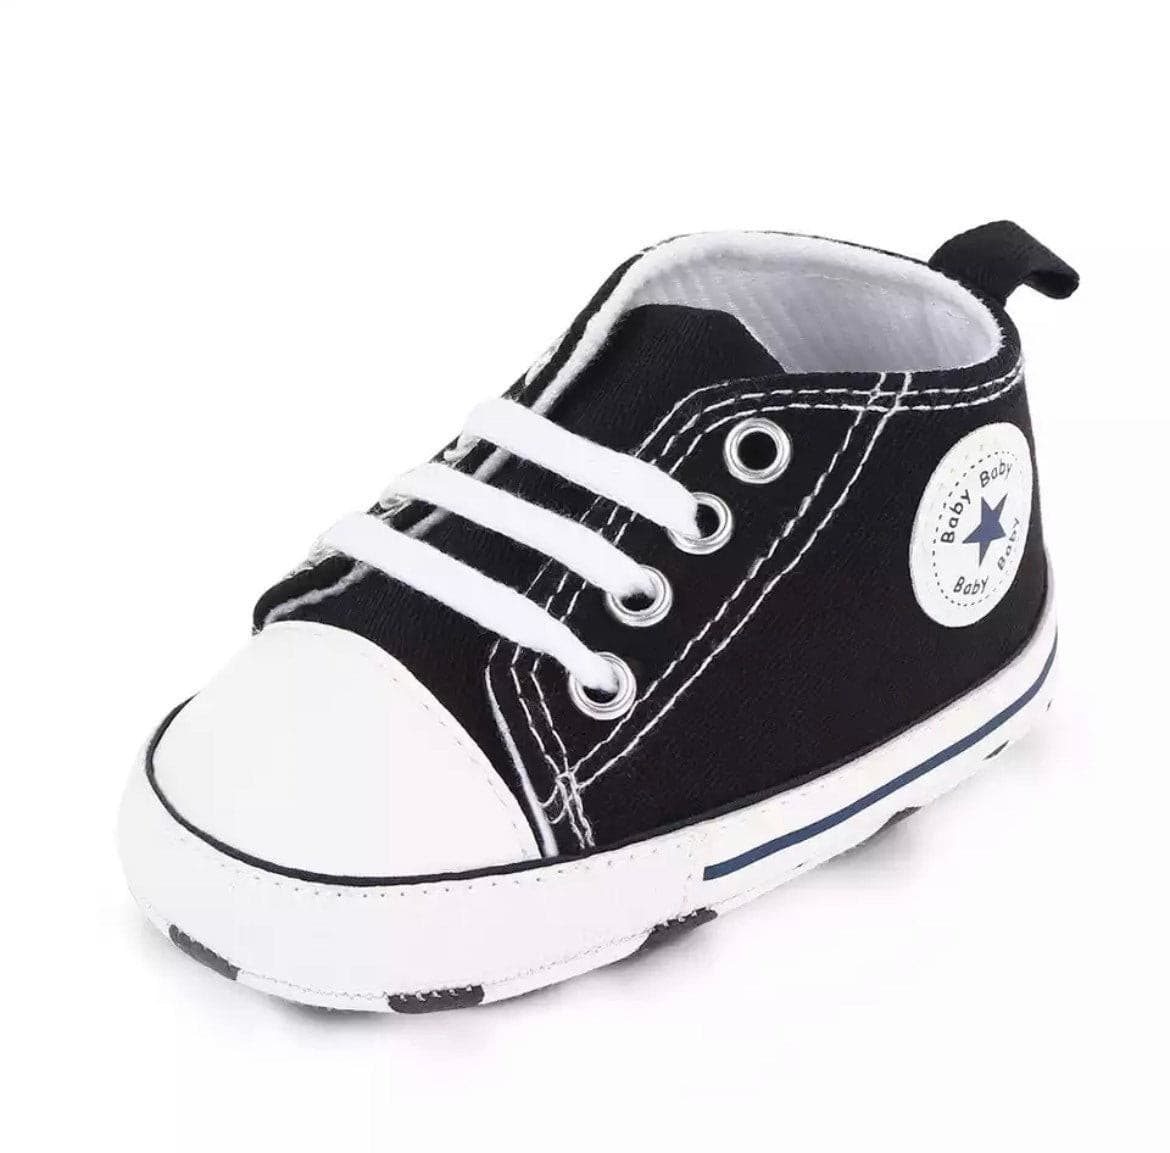 Star Born - Unisex Baby Sneakers Like Converse-
 Welcome! Thanks for looking in our shop and viewing these beautiful baby shoes.Your baby will look so adorableIn these smart casual shoes perfect for so many occas-Bijou Bubs